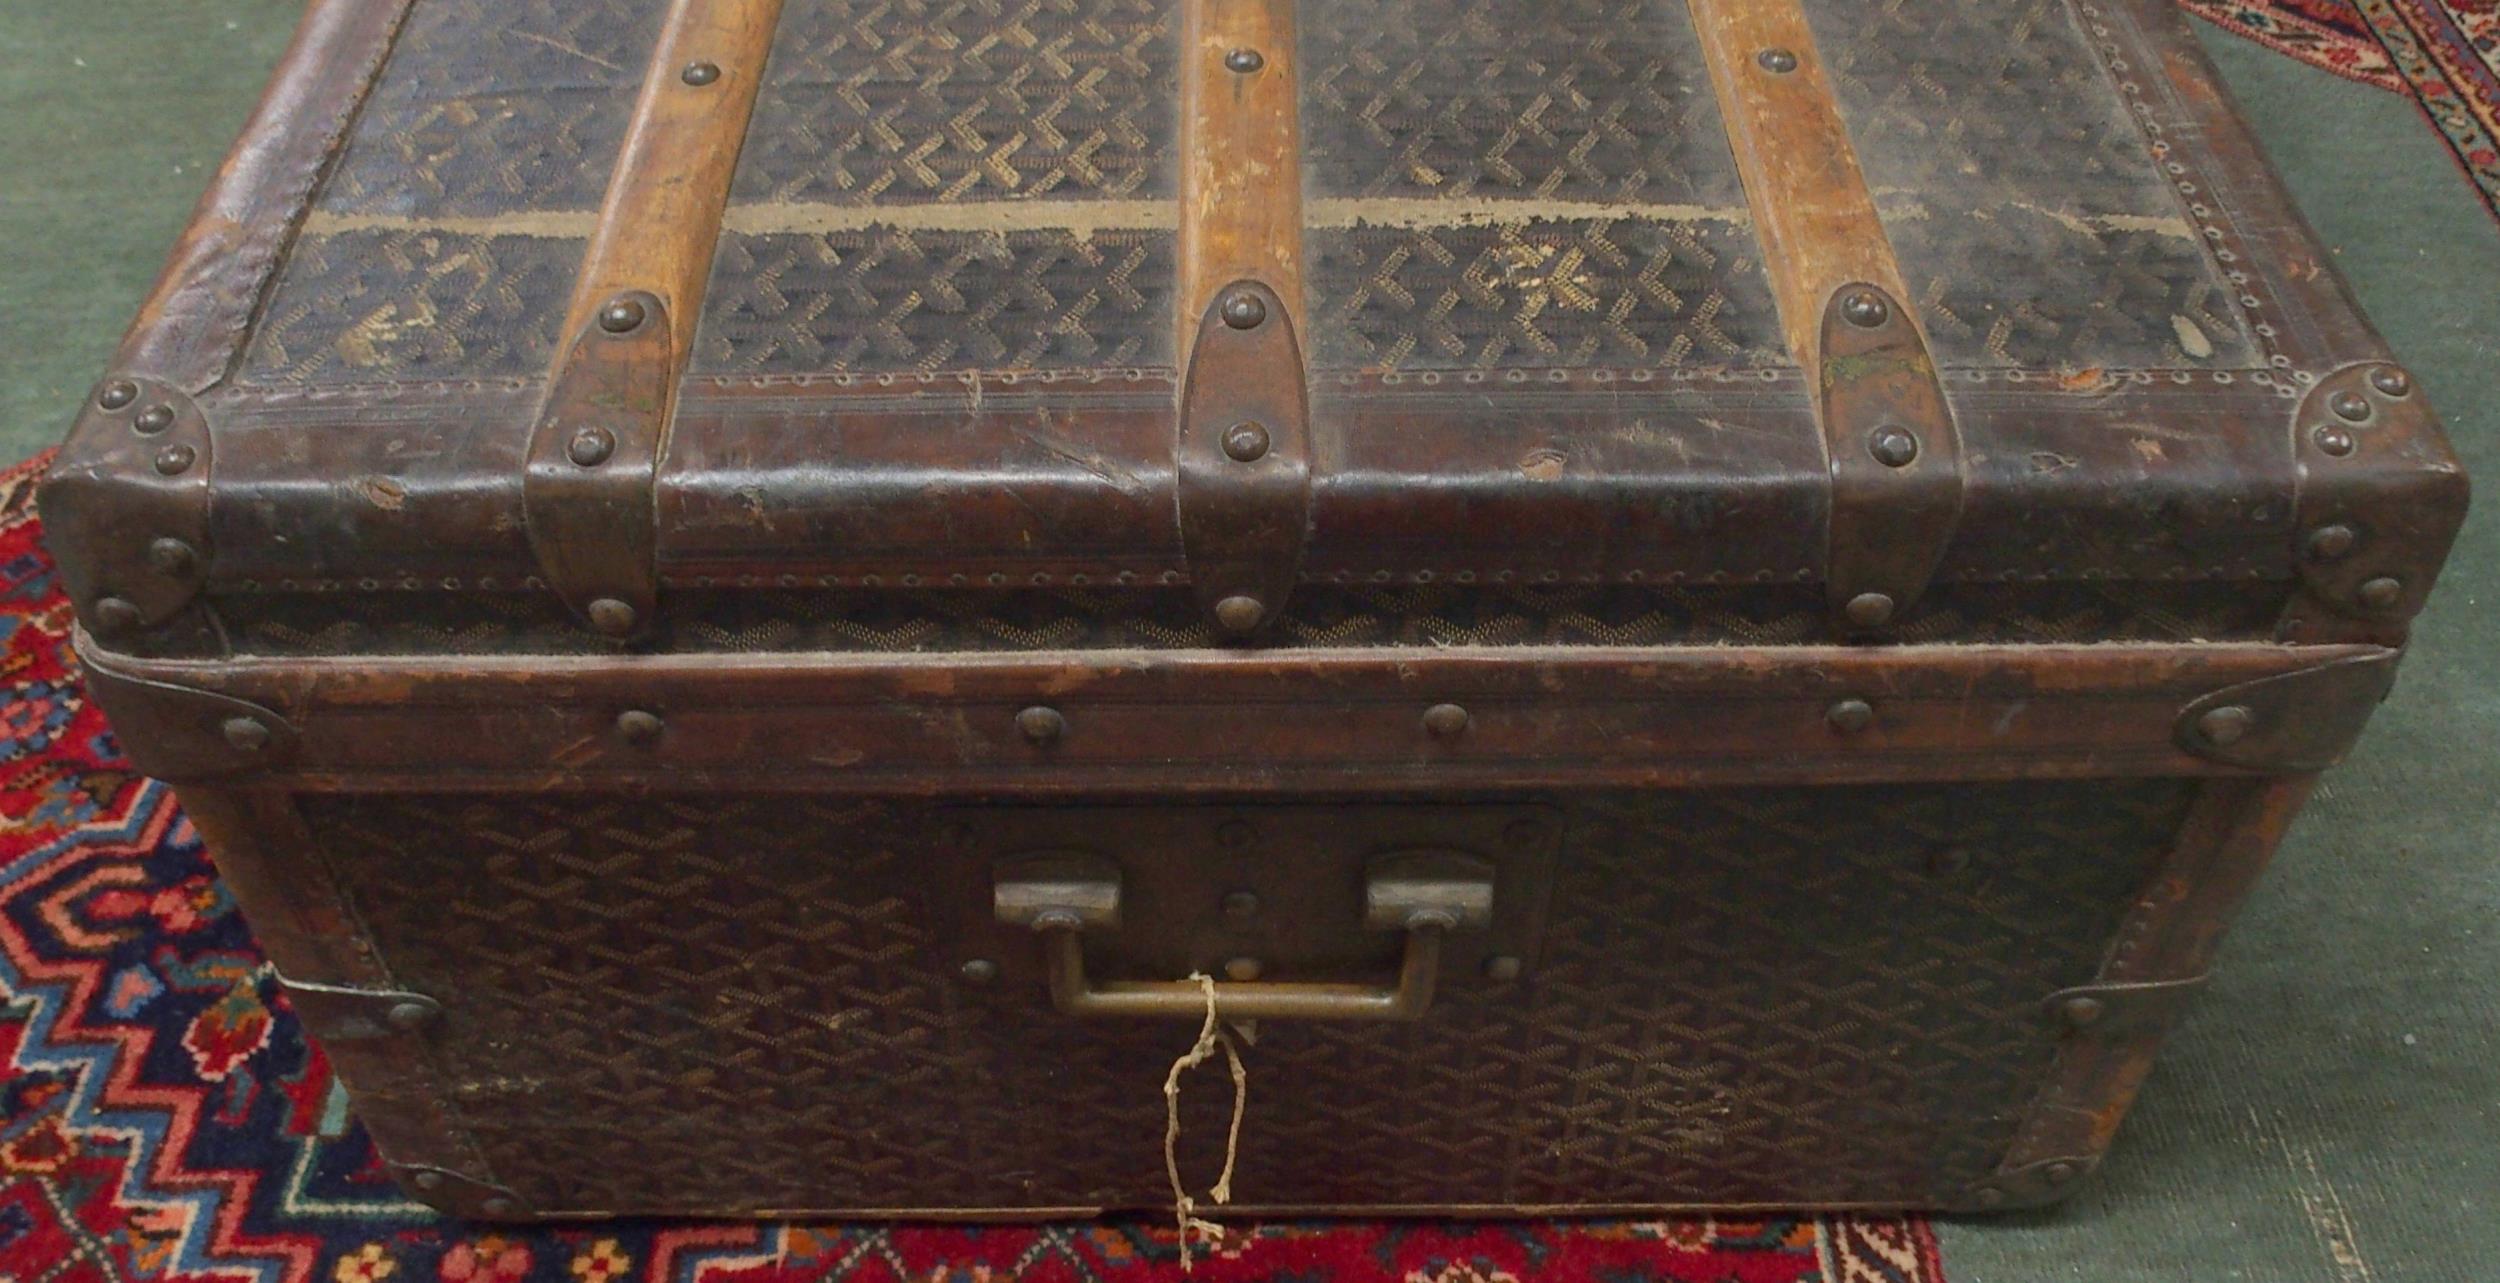 AN E GOYARD PARIS LEATHER AND WOOD BOUND STEAMER TRUNK with all-over printed design, leather edges - Image 15 of 29